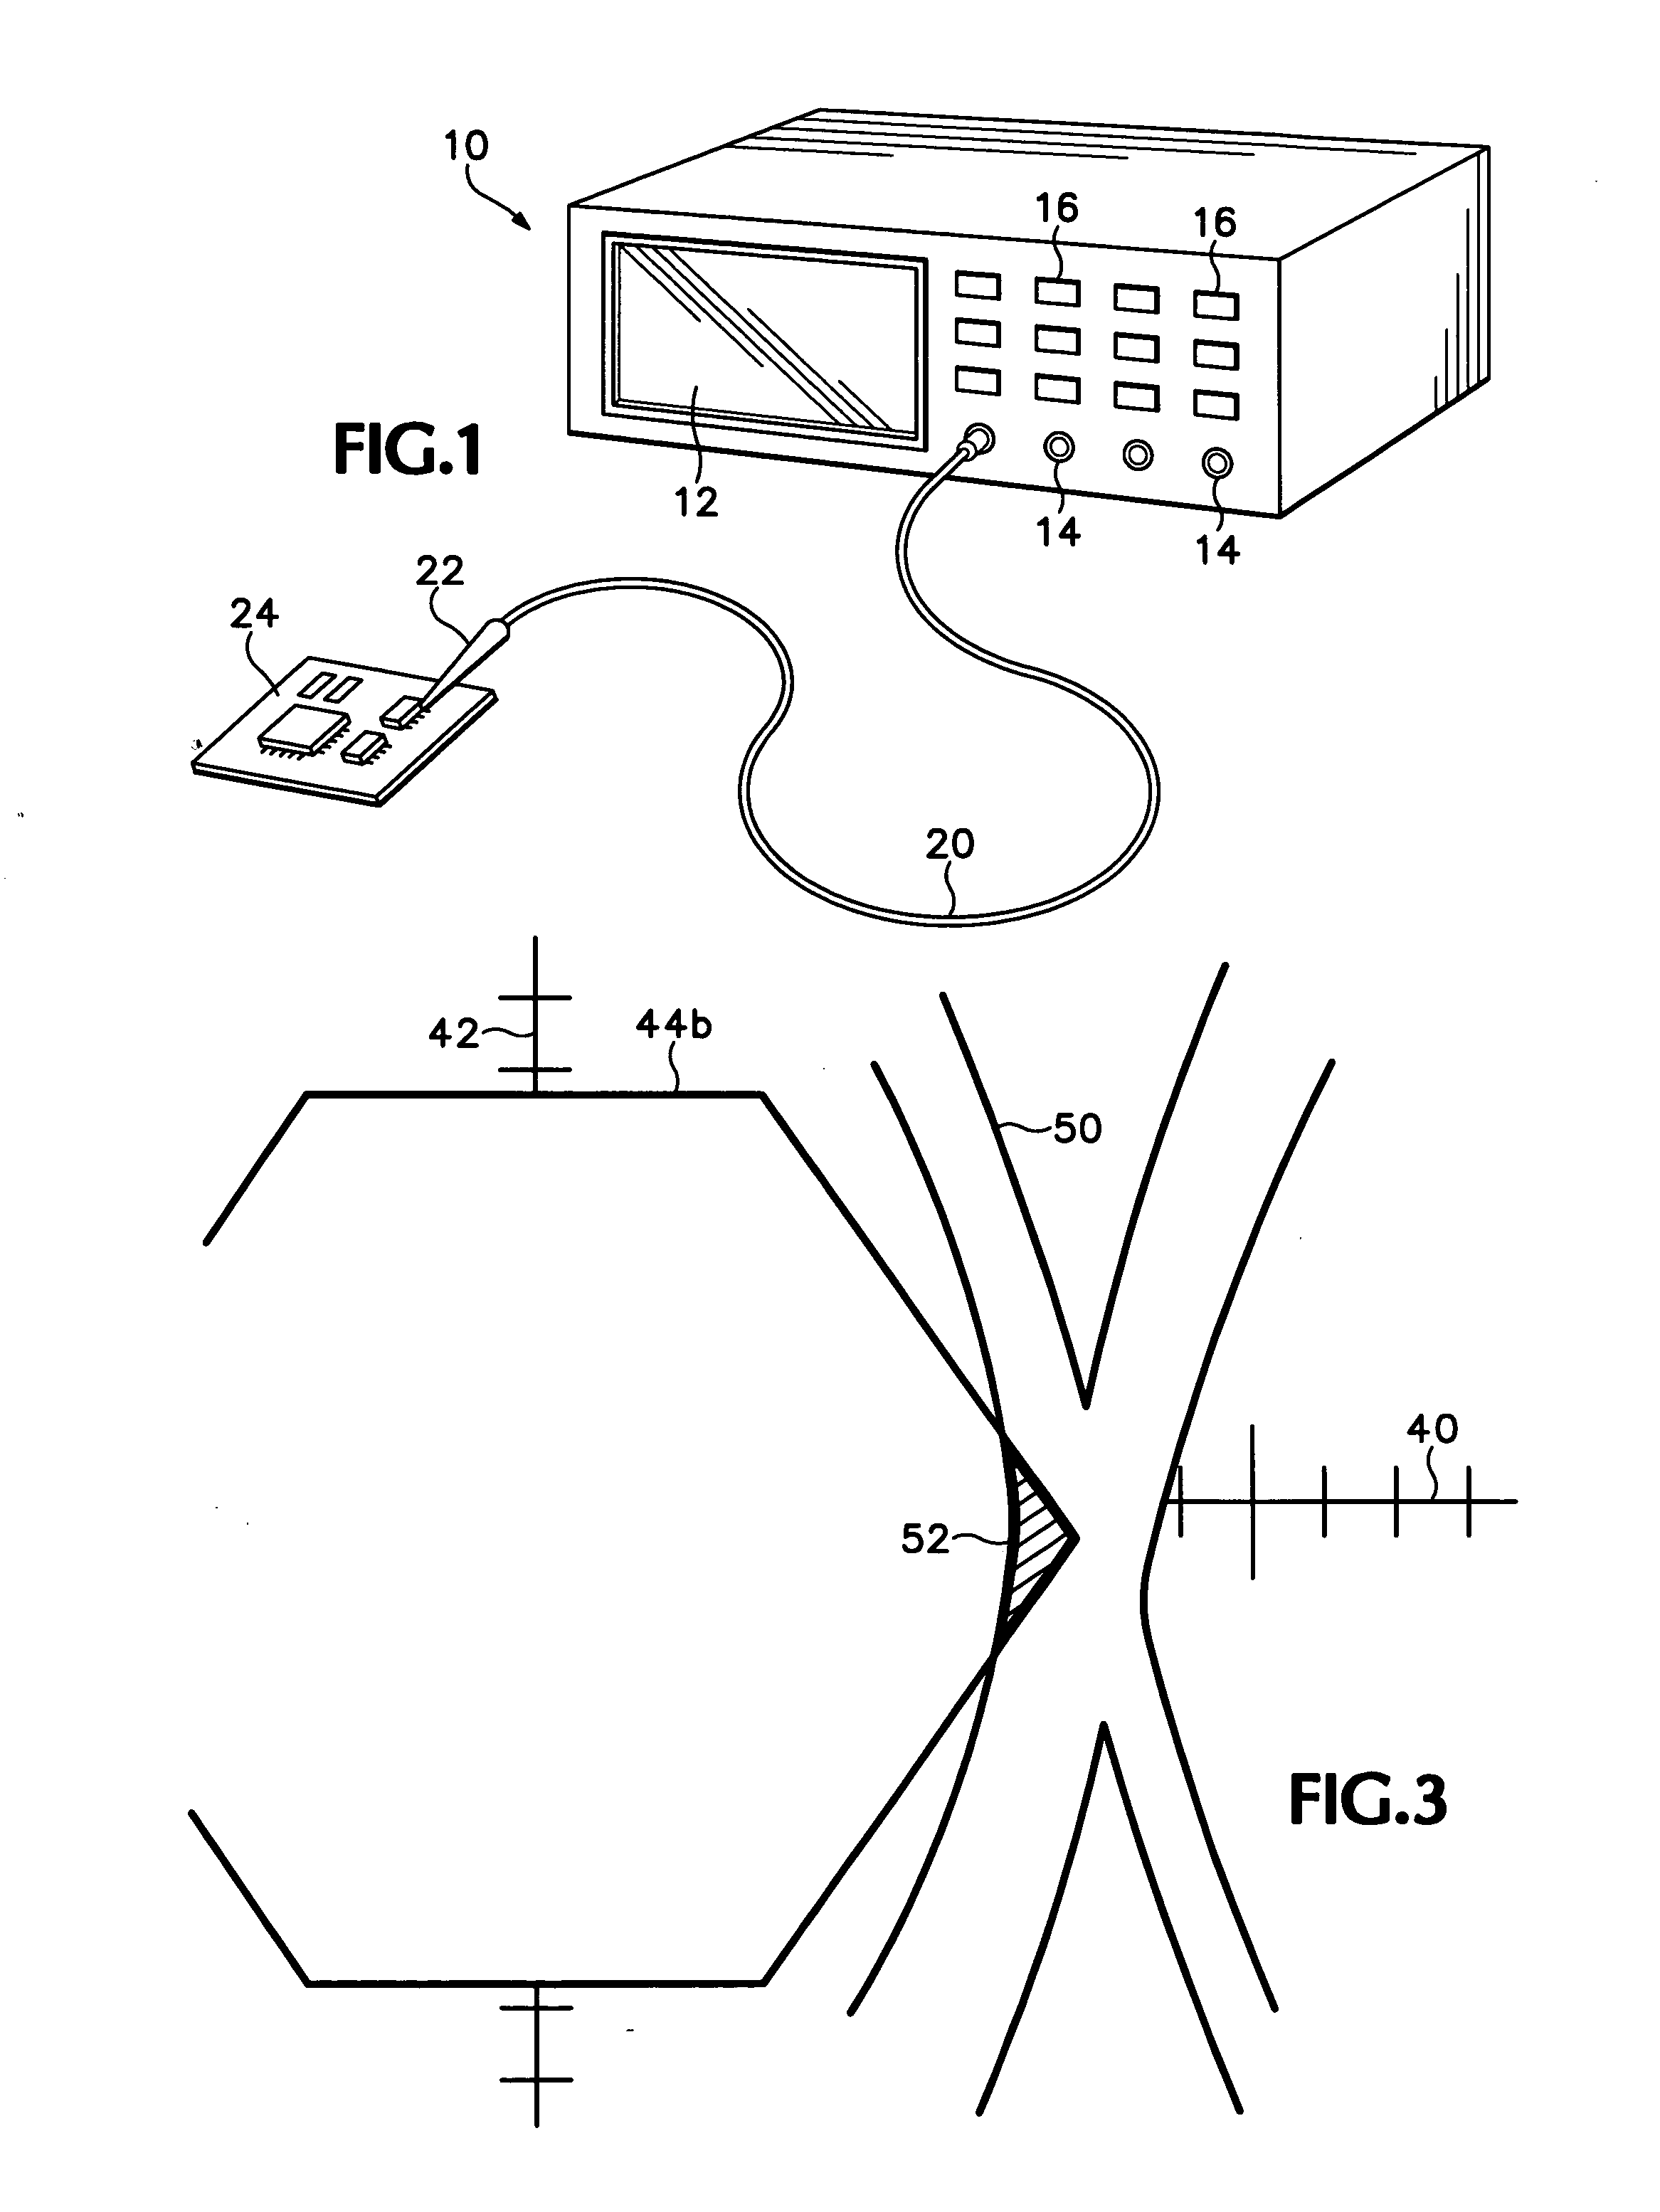 Method and apparatus for visually indicating mask violation locations